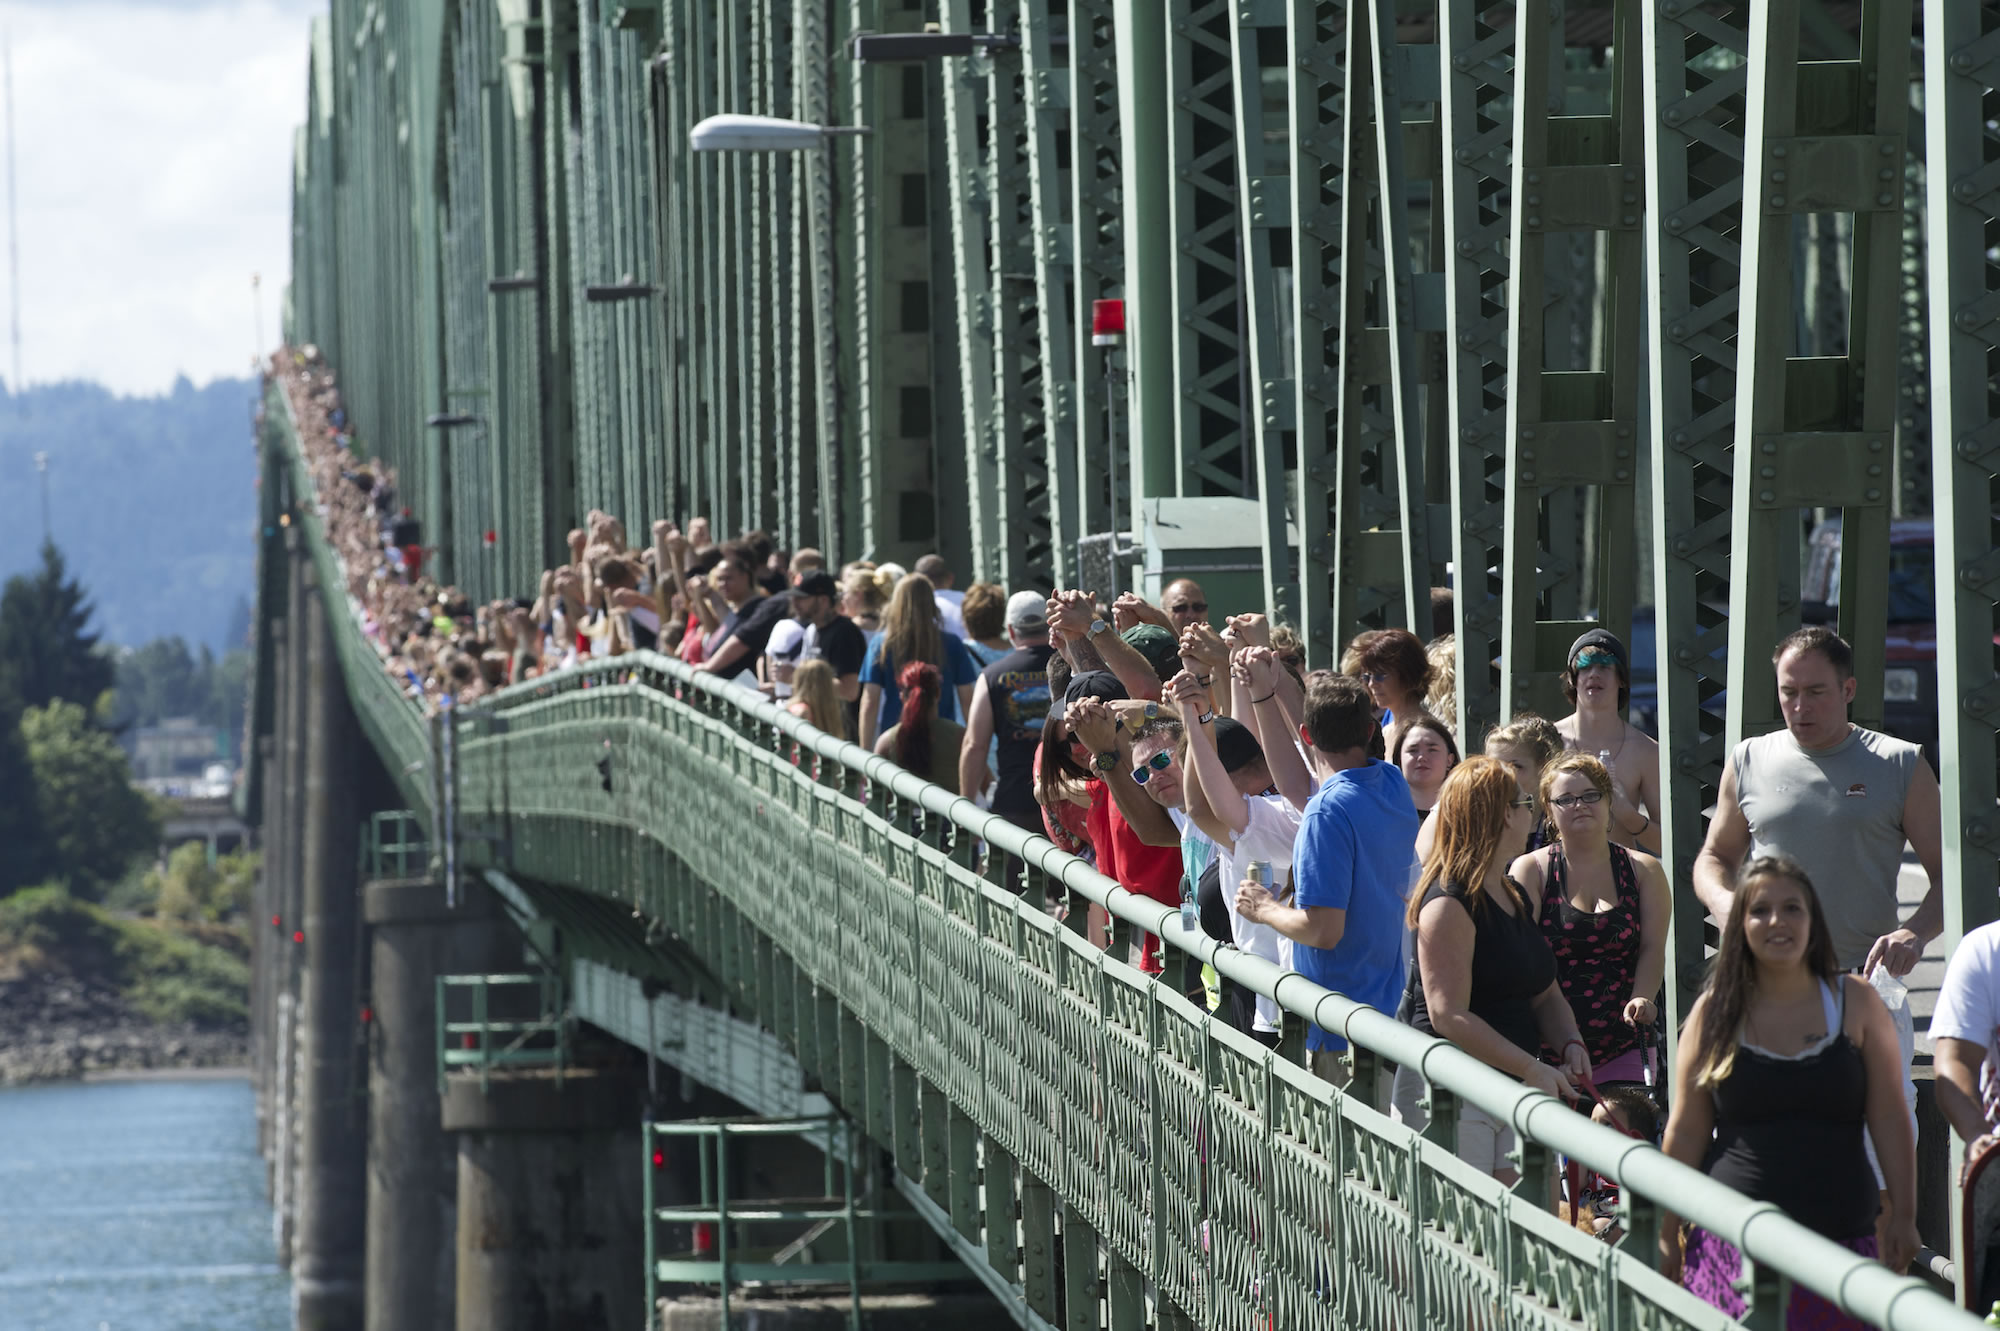 Thousands gather on the pedestrian sidewalk of the Interstate 5 Bridge on Sept. 2, 2013, joining hands and cheering their recovery from drug addiction. The 12th annual Hands Across the Bridge event marked the beginning of National Recovery Month. Hands Across the Bridge will be on Sept.